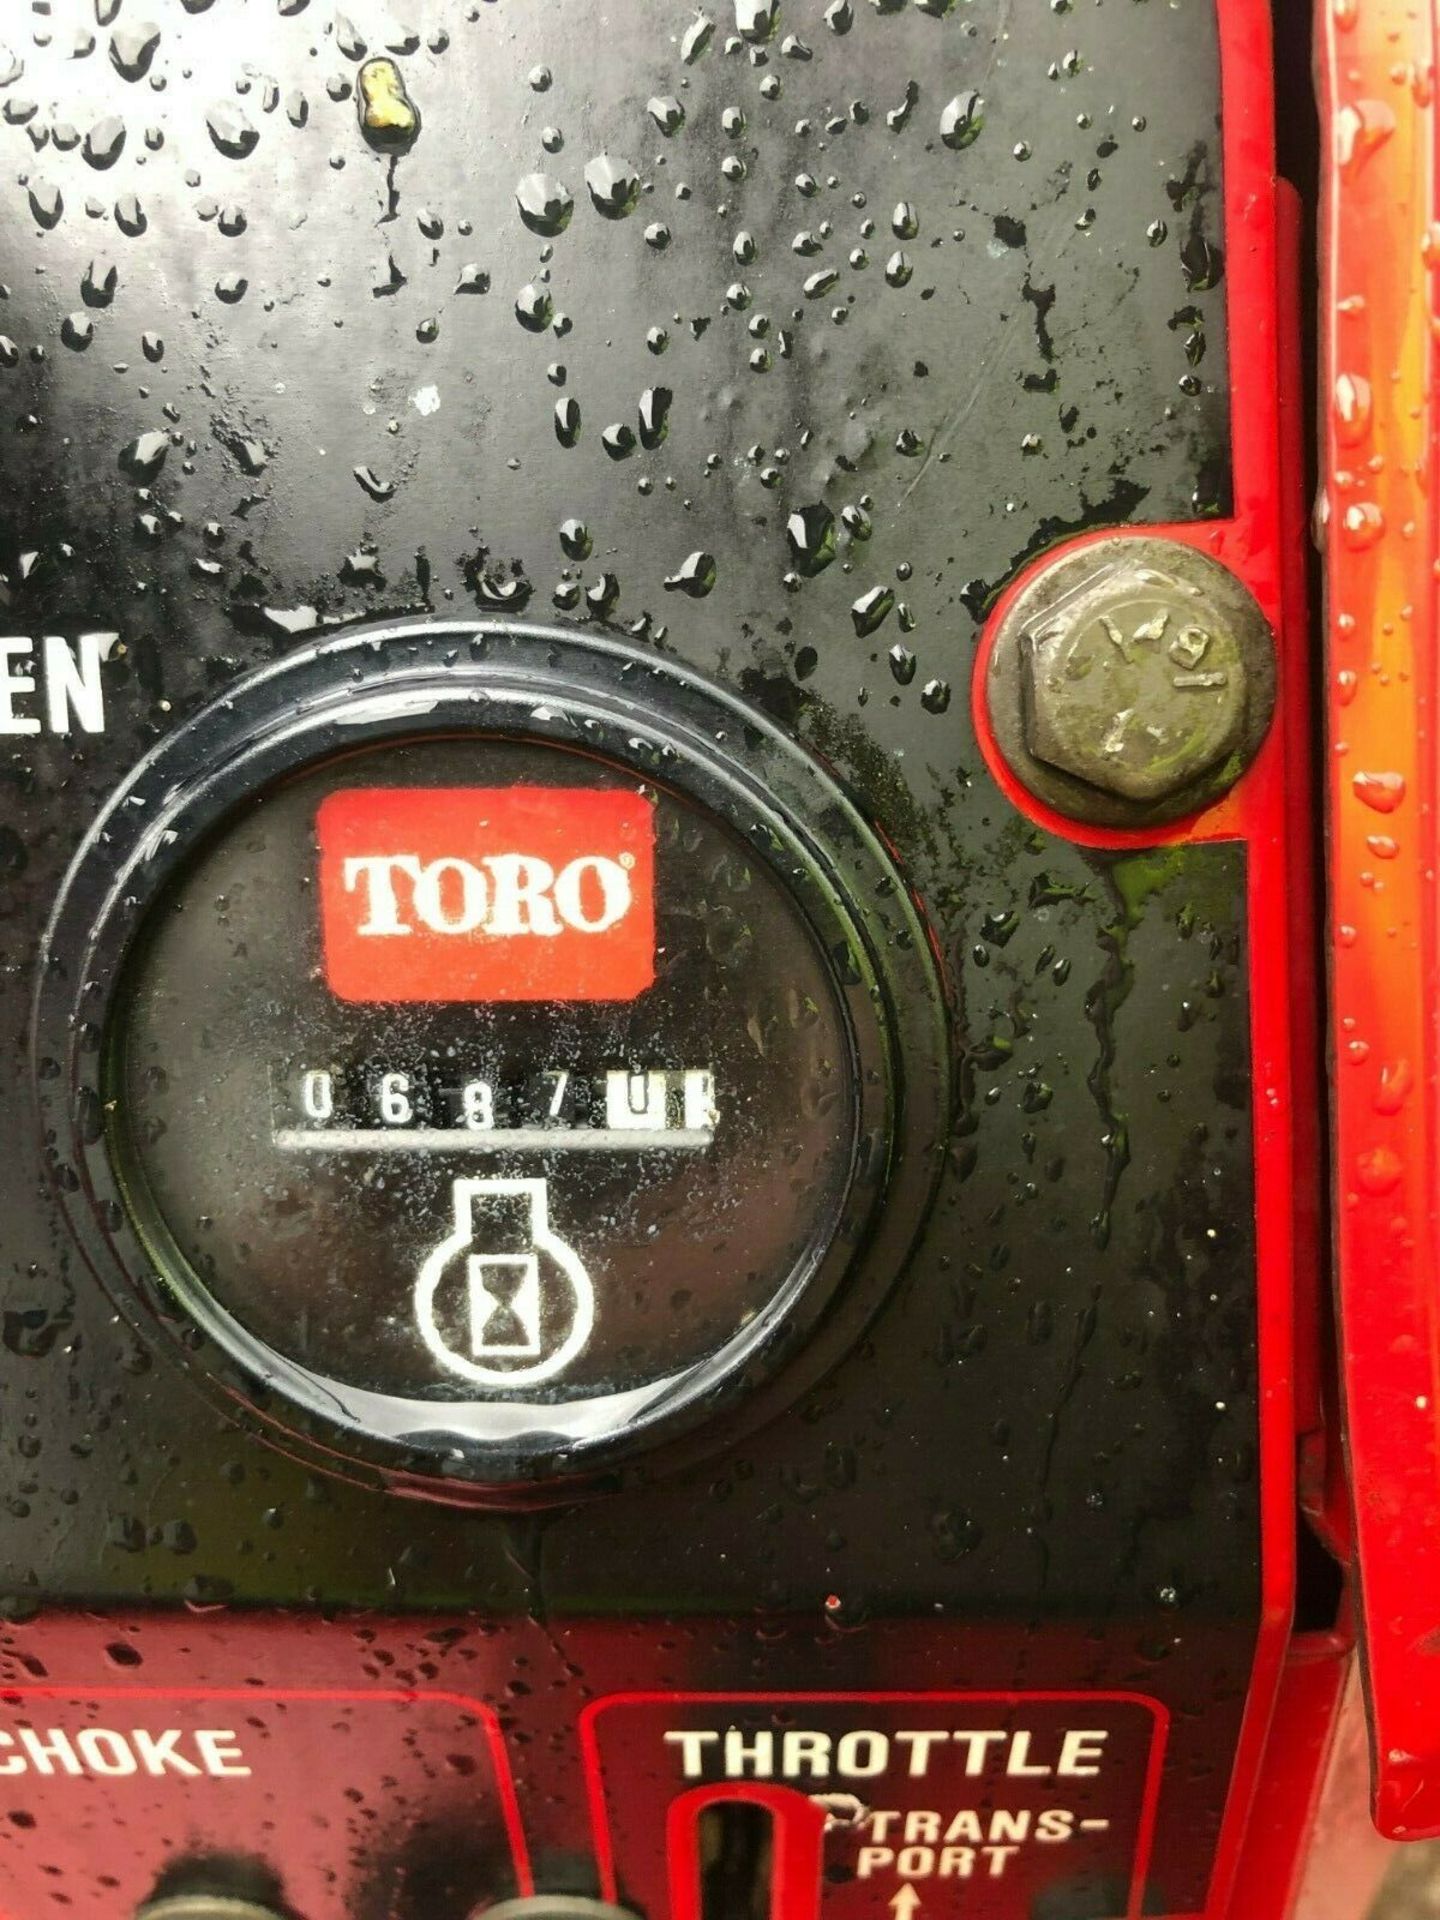 TORO 216 PETROL, TRIPLE RIDE ON MOWER, GENUINE 687 HOURS, 1 OWNER FROM NEW *NO VAT* - Image 5 of 5